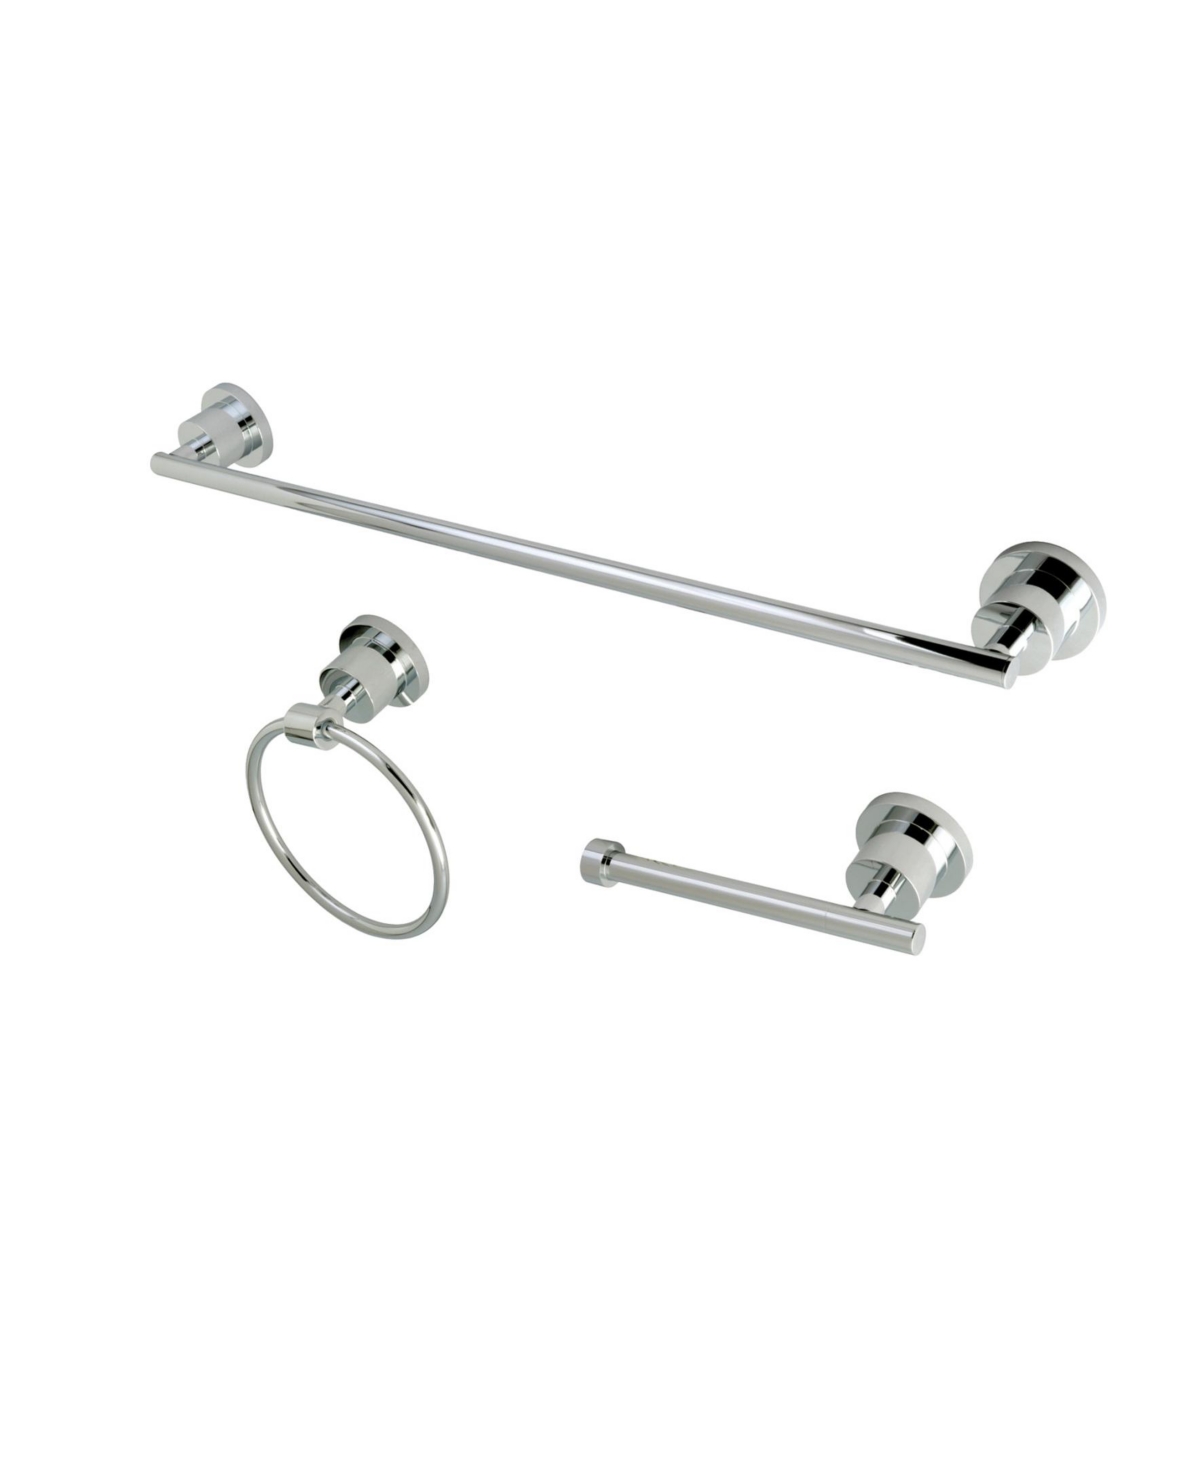 Kingston Brass Concord Modern 3-Pc. Bathroom Accessories Set in Polished Chrome Bedding